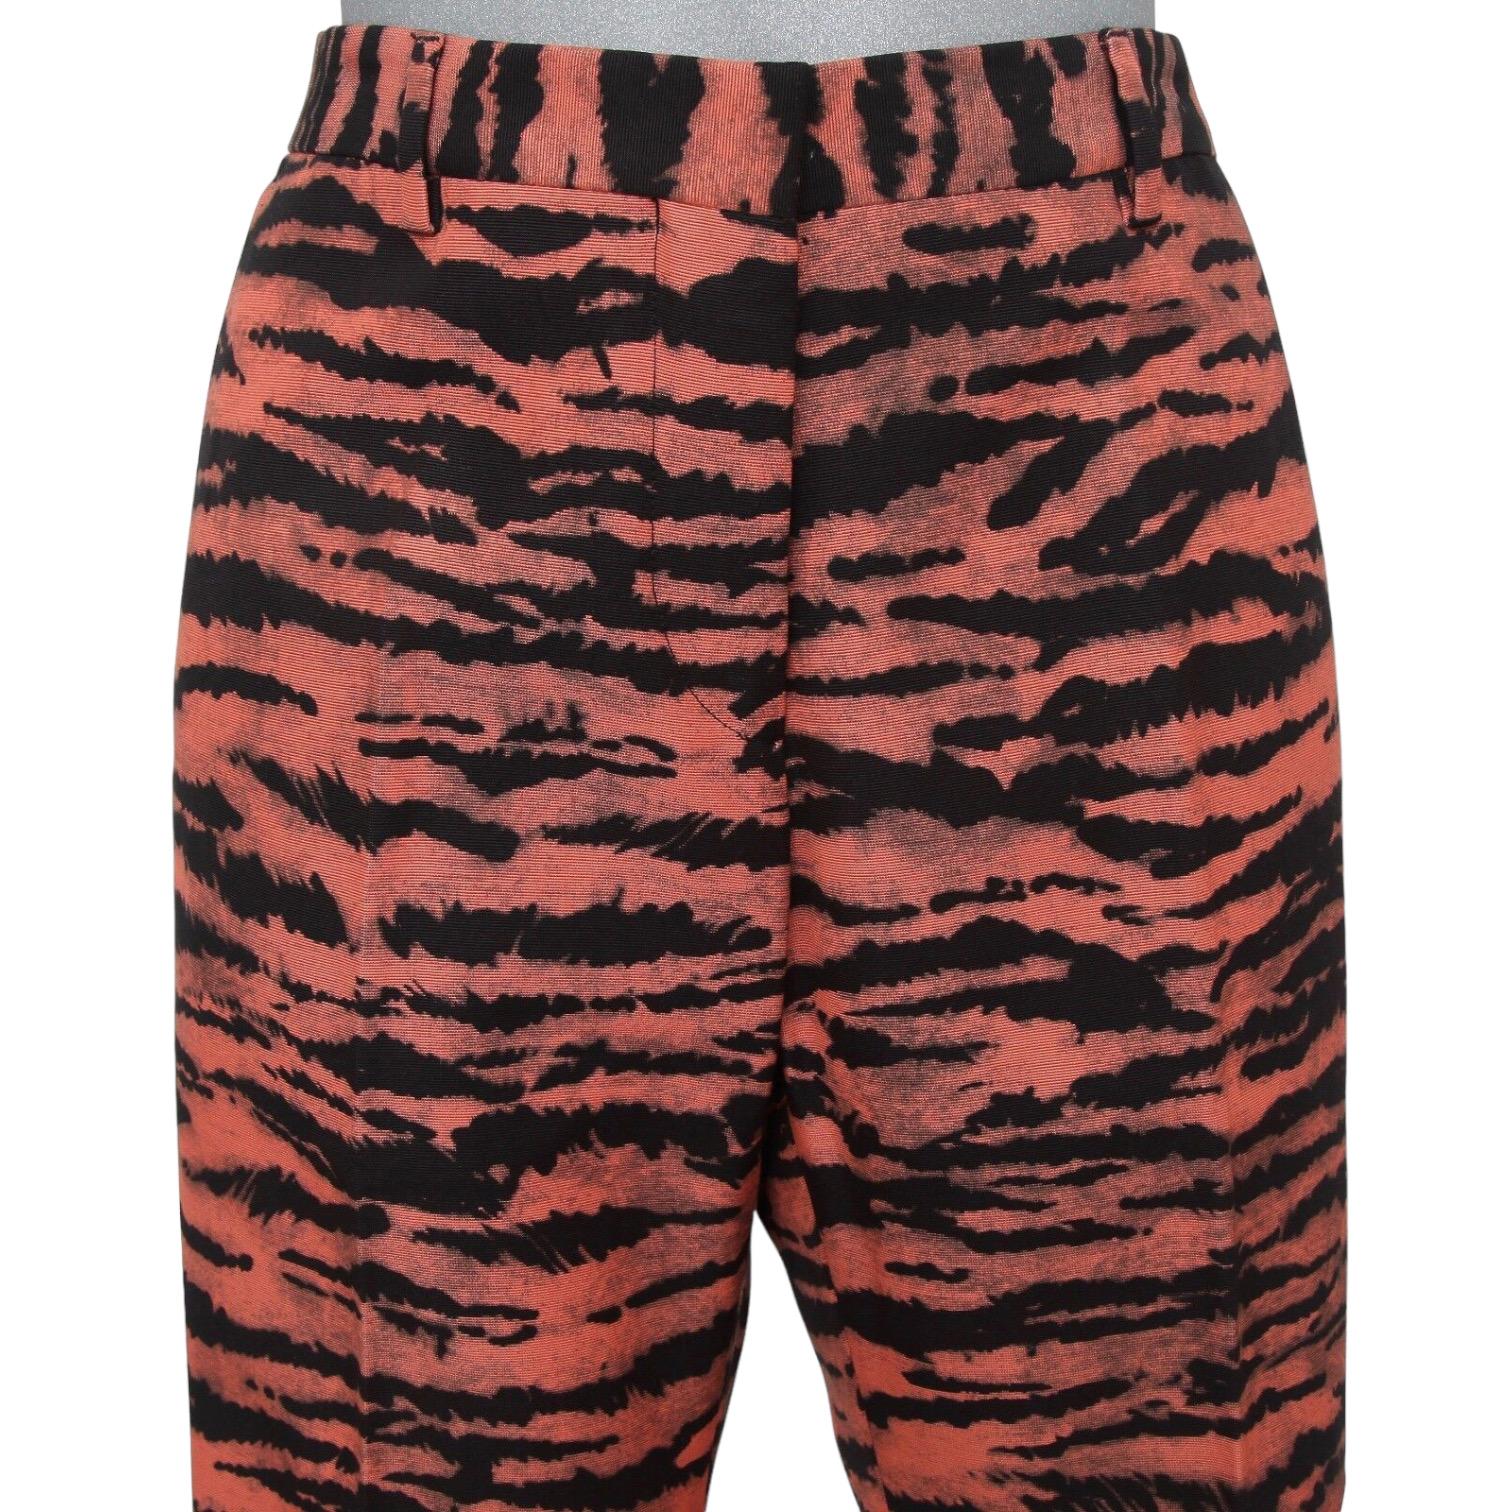 DRIES VAN NOTEN Pant Straight Leg Print Black Peach Sz 36 NWT In Excellent Condition For Sale In Hollywood, FL